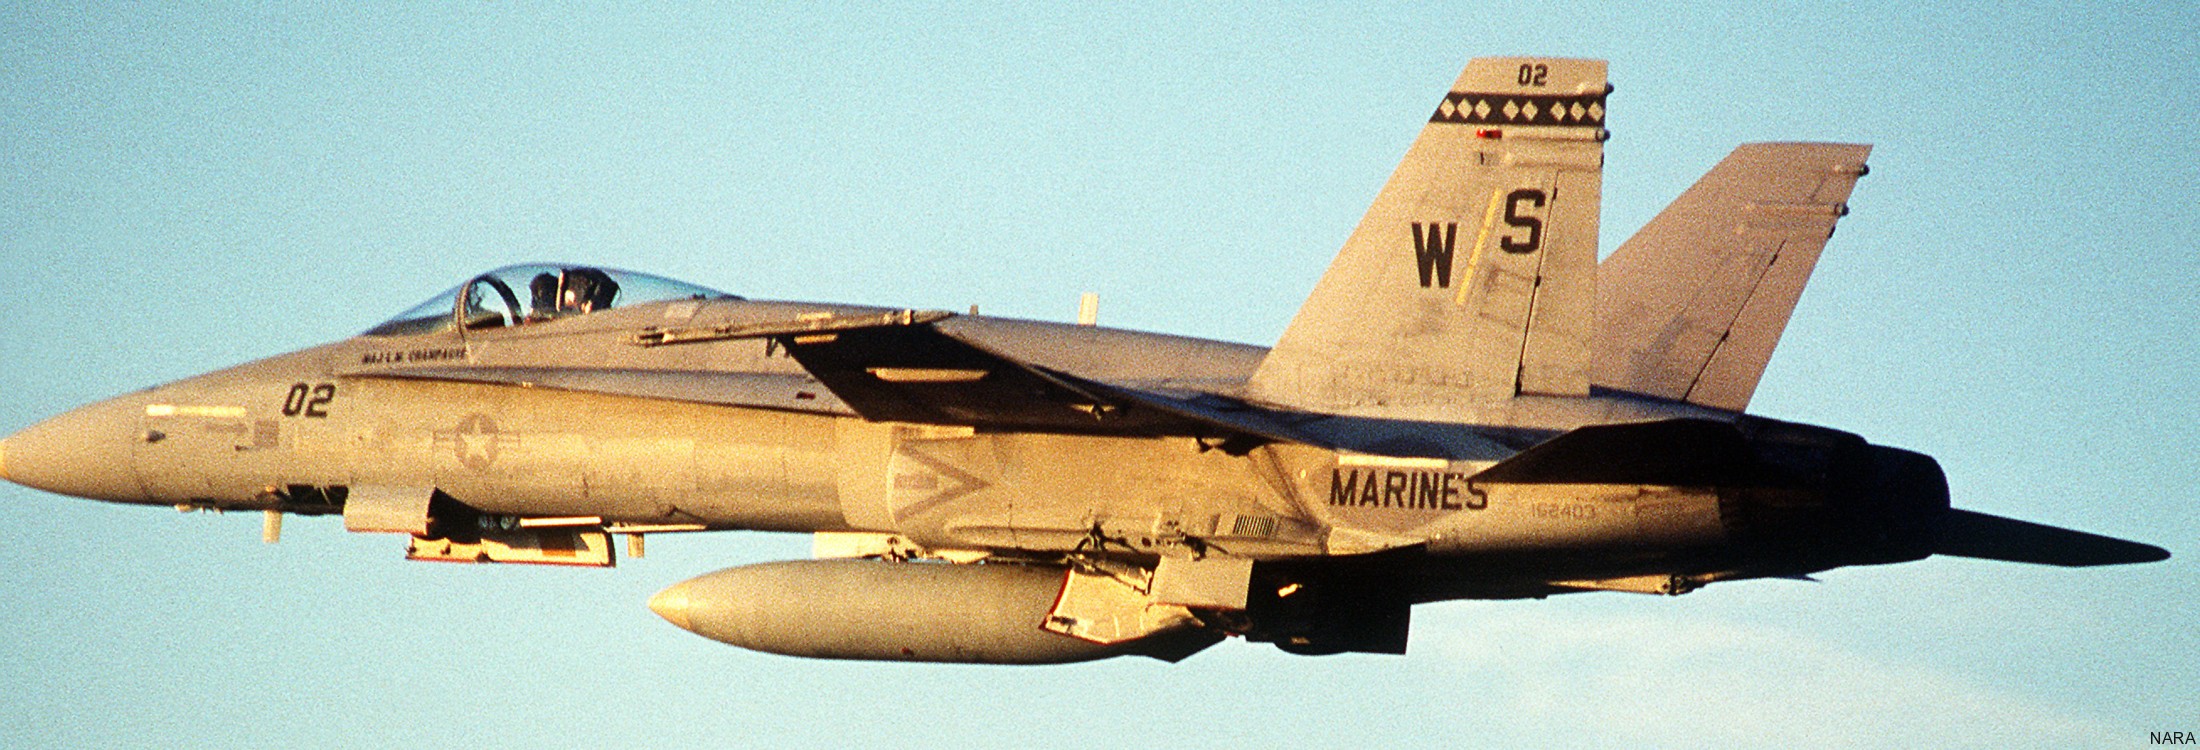 vmfa-323 death rattlers marine fighter attack squadron f/a-18a hornet 123 exercise cope north